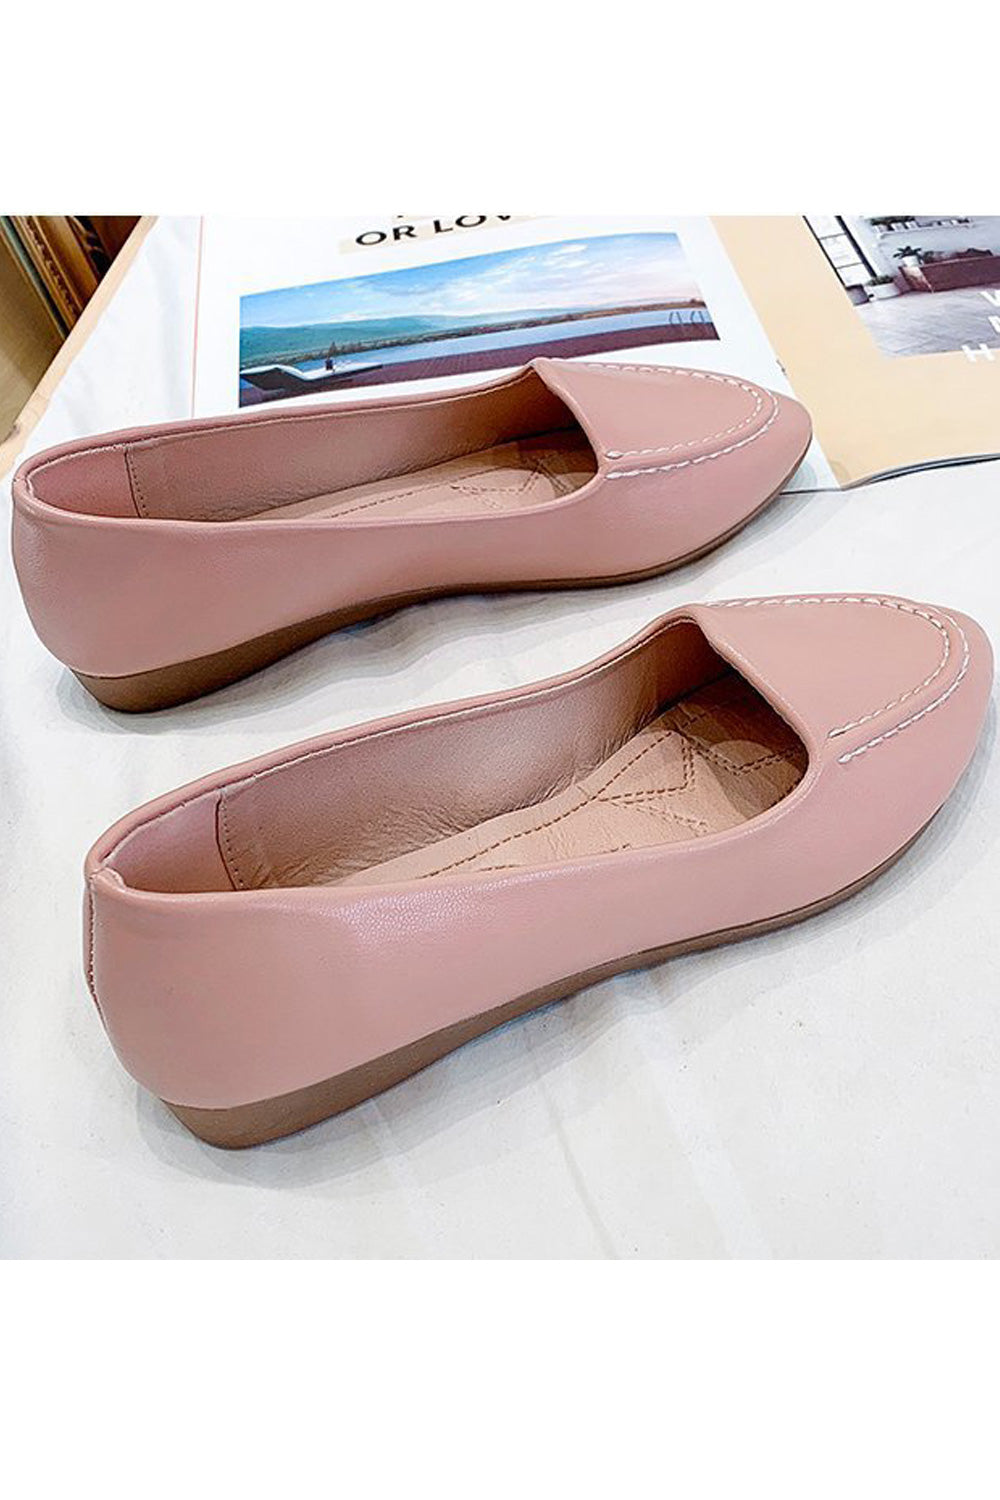 Women Comfortable Solid Colored Flat Heel Shallow Mouth Soft Loafer Shoes - WSFL104256